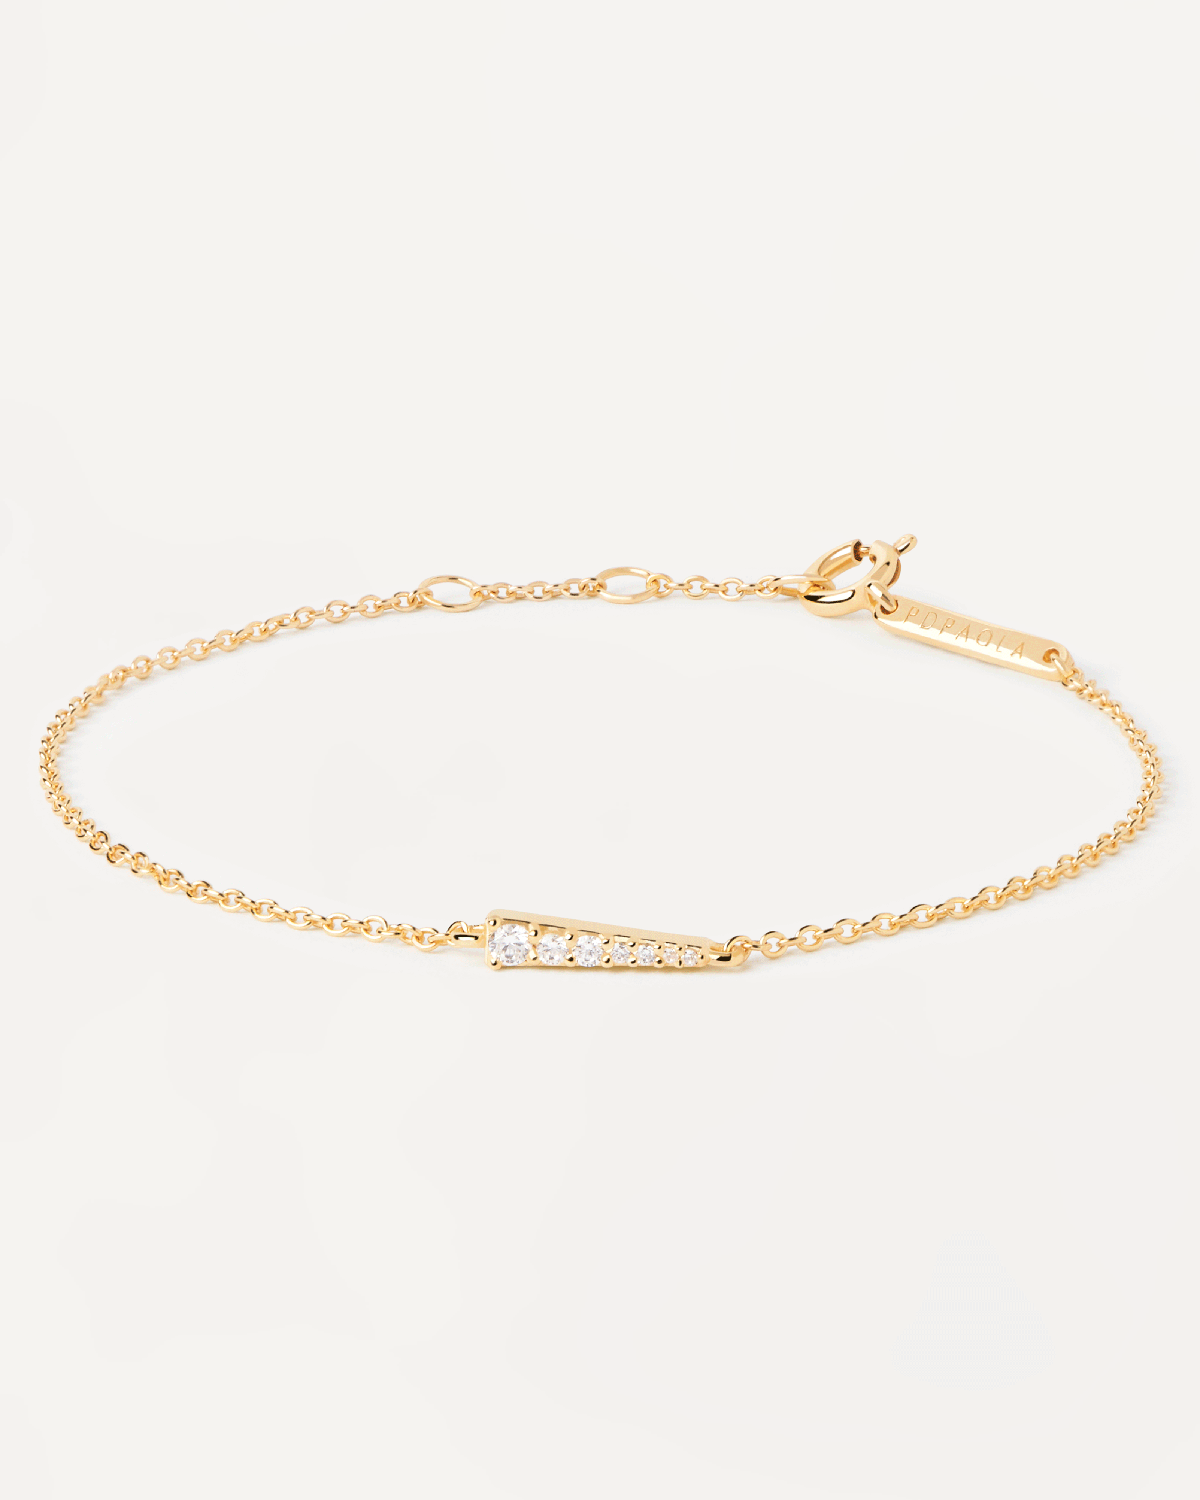 2023 Selection | Peak Bracelet. Gold-plated silver bracelet with white zirconia motive in tip shape. Get the latest arrival from PDPAOLA. Place your order safely and get this Best Seller. Free Shipping.